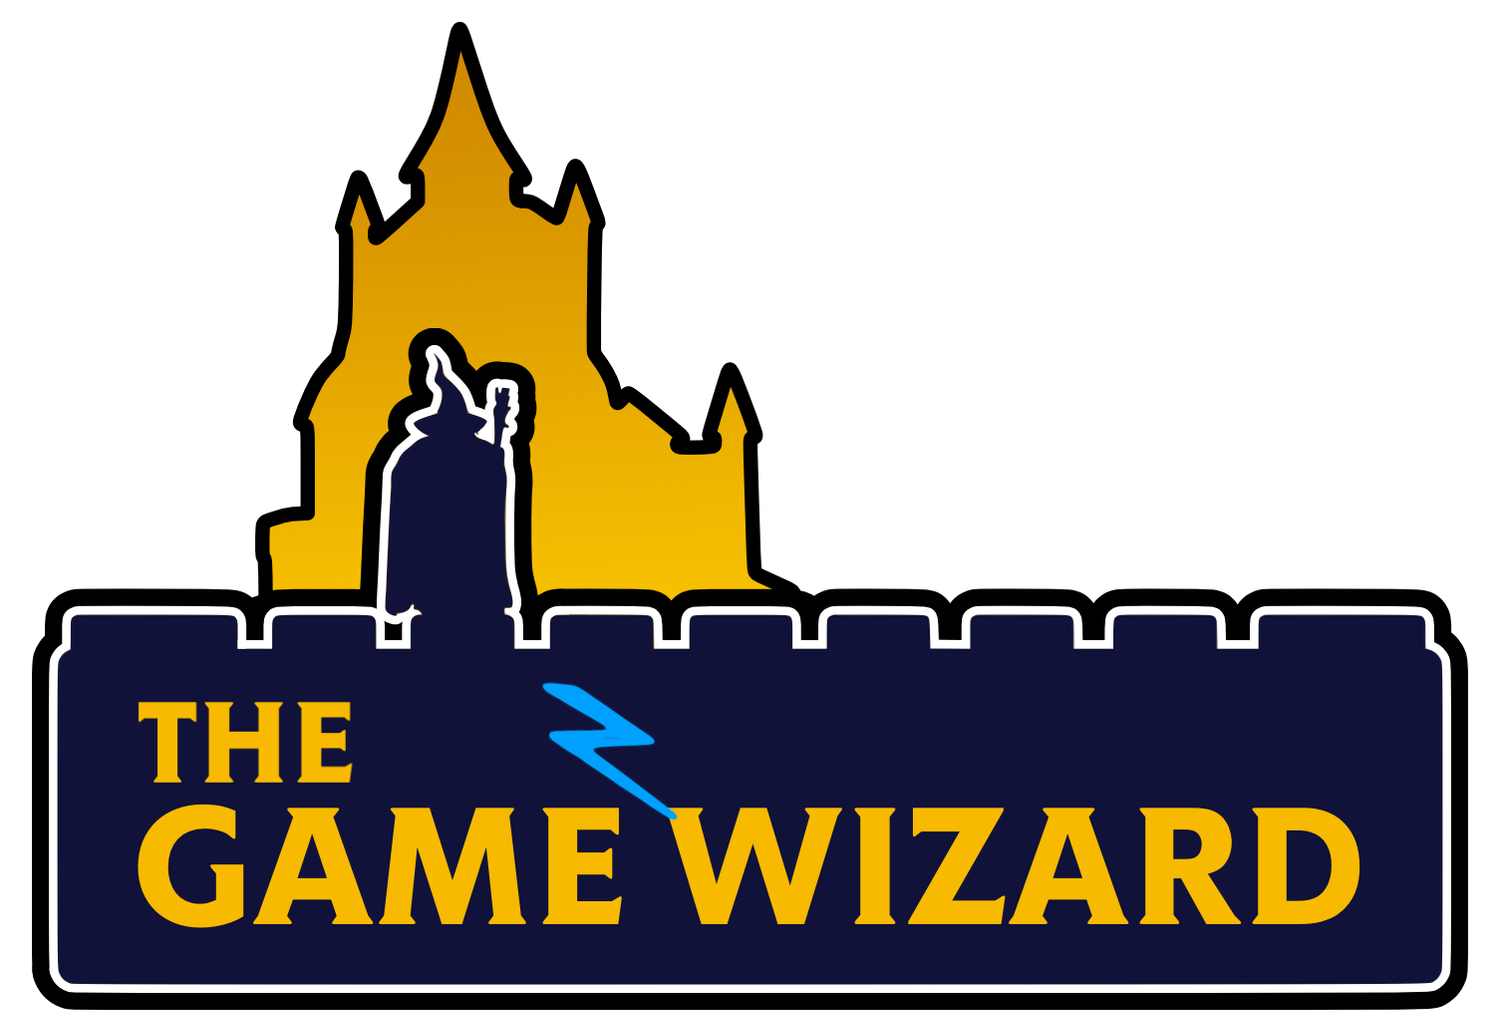 The Game Wizard